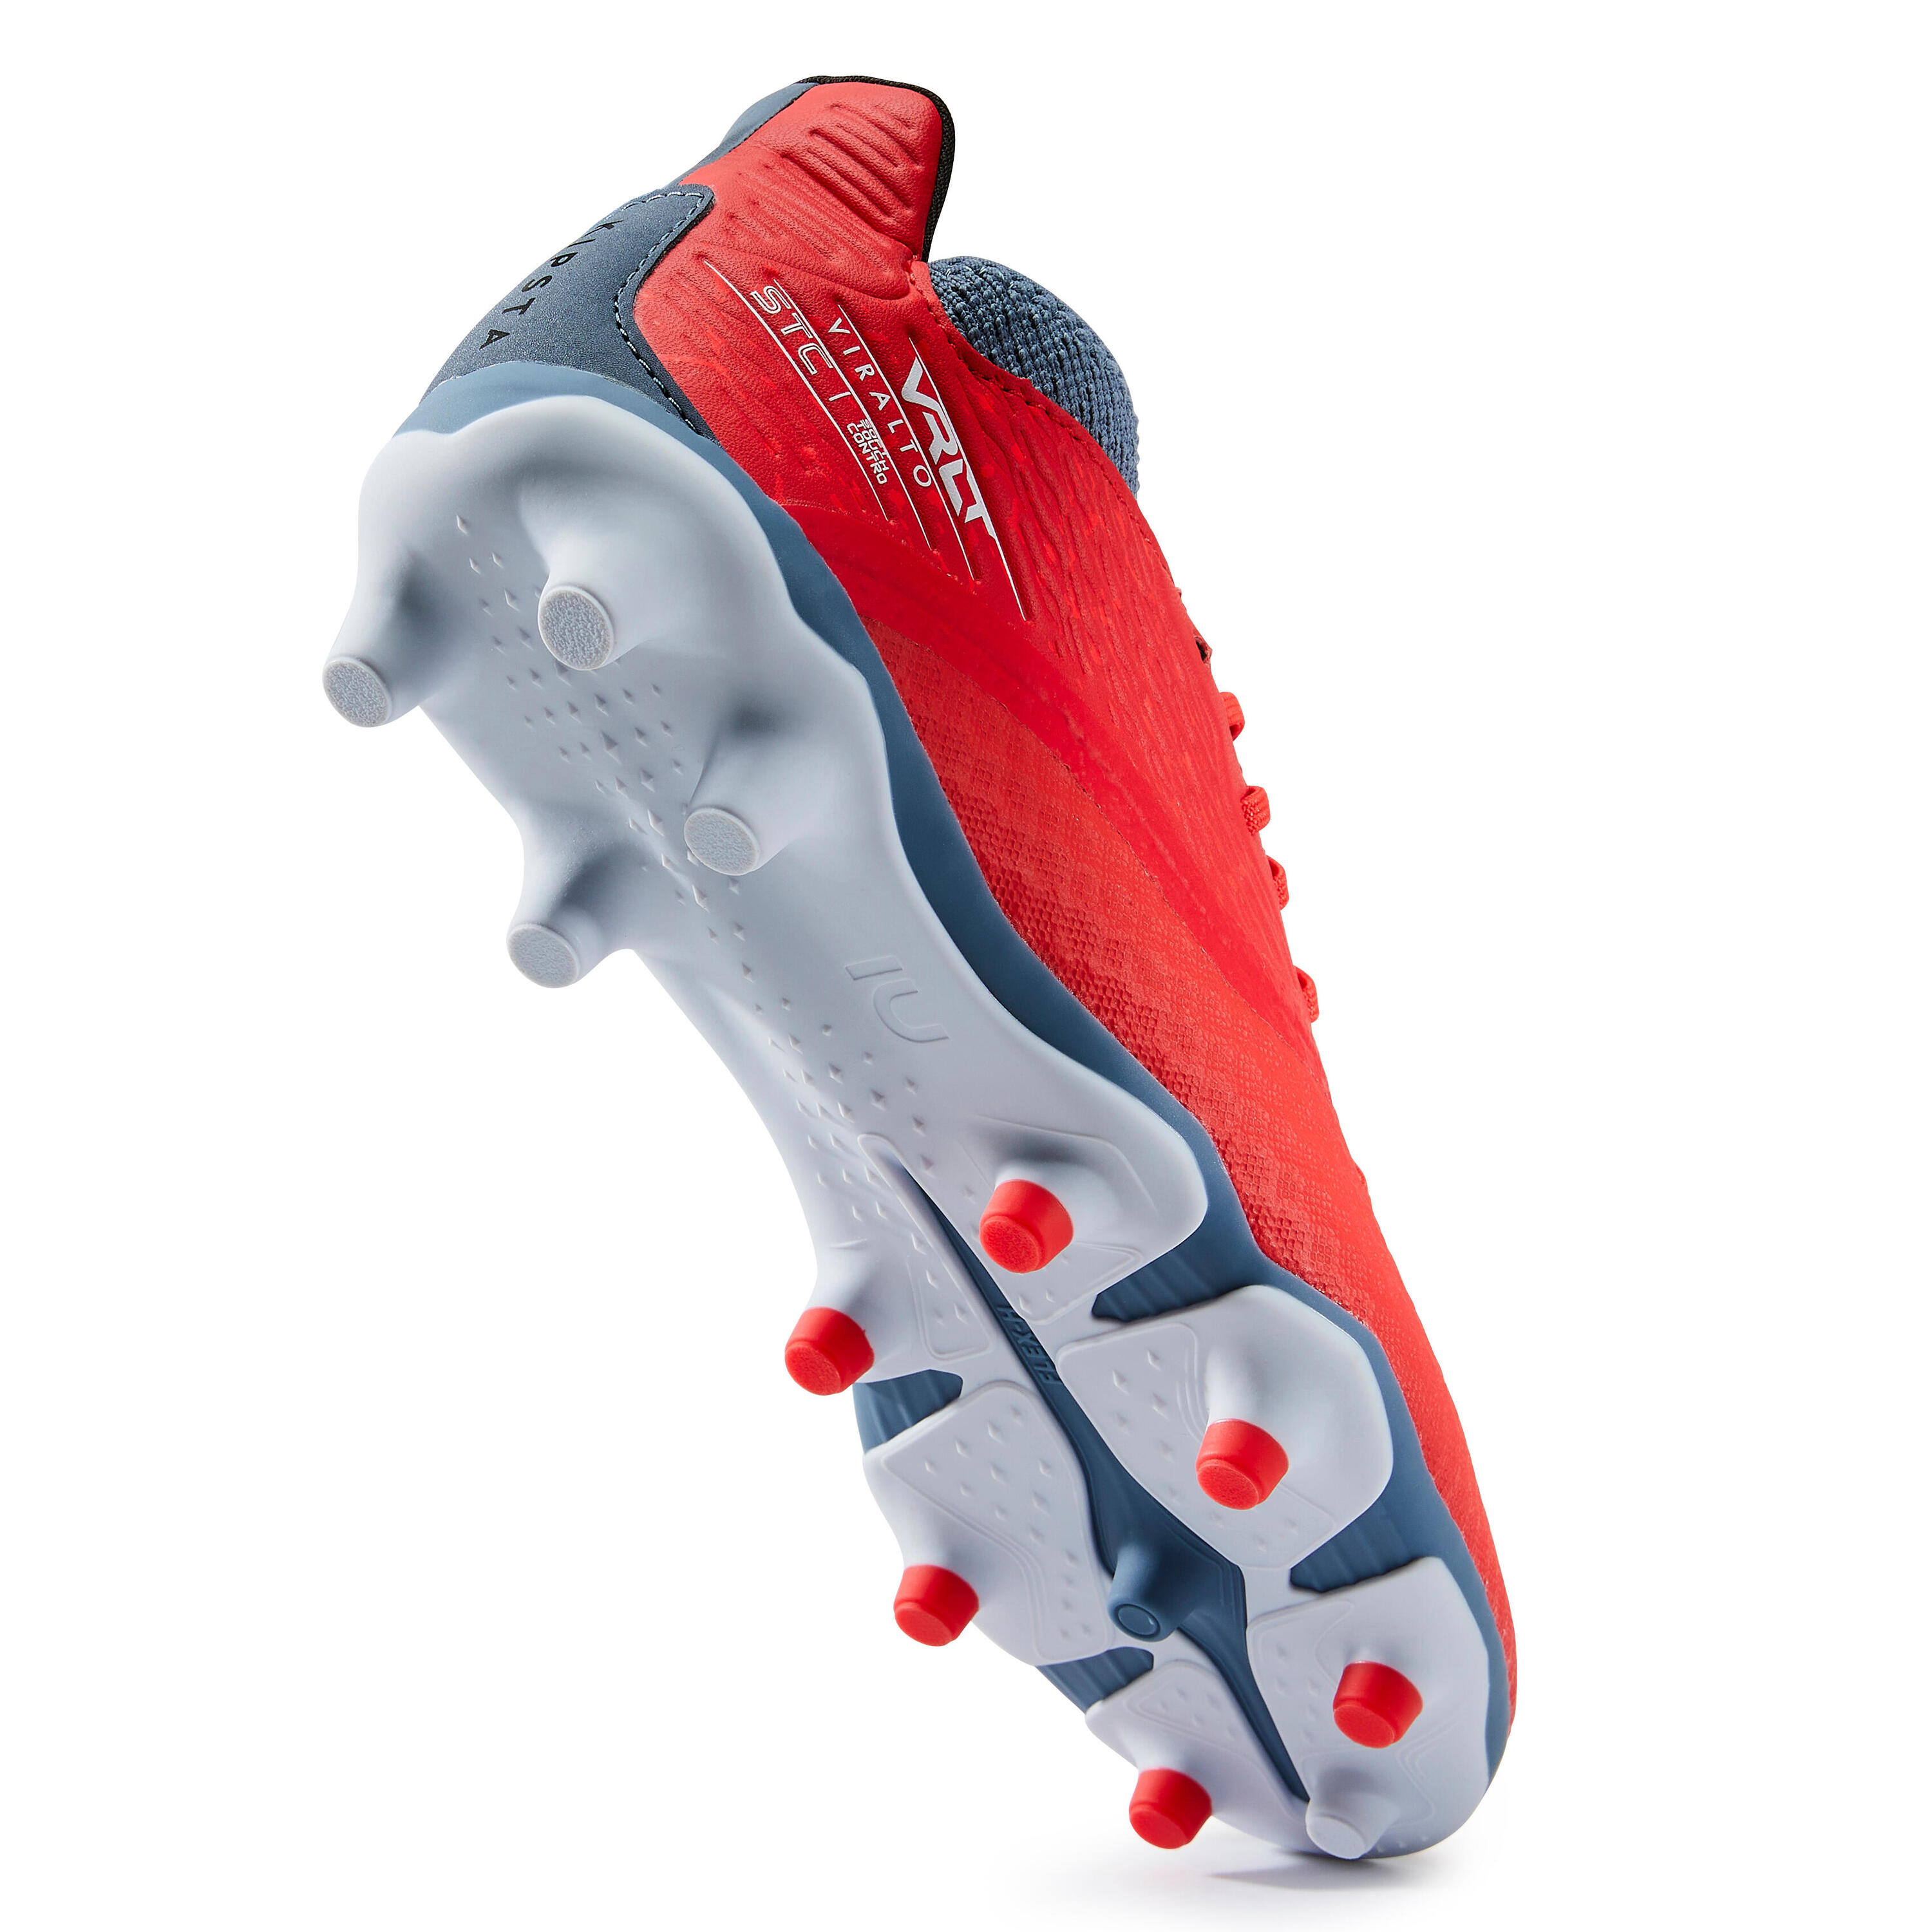 Kids' Lace-Up Football Boots Viralto III FG - Red/Grey 5/11